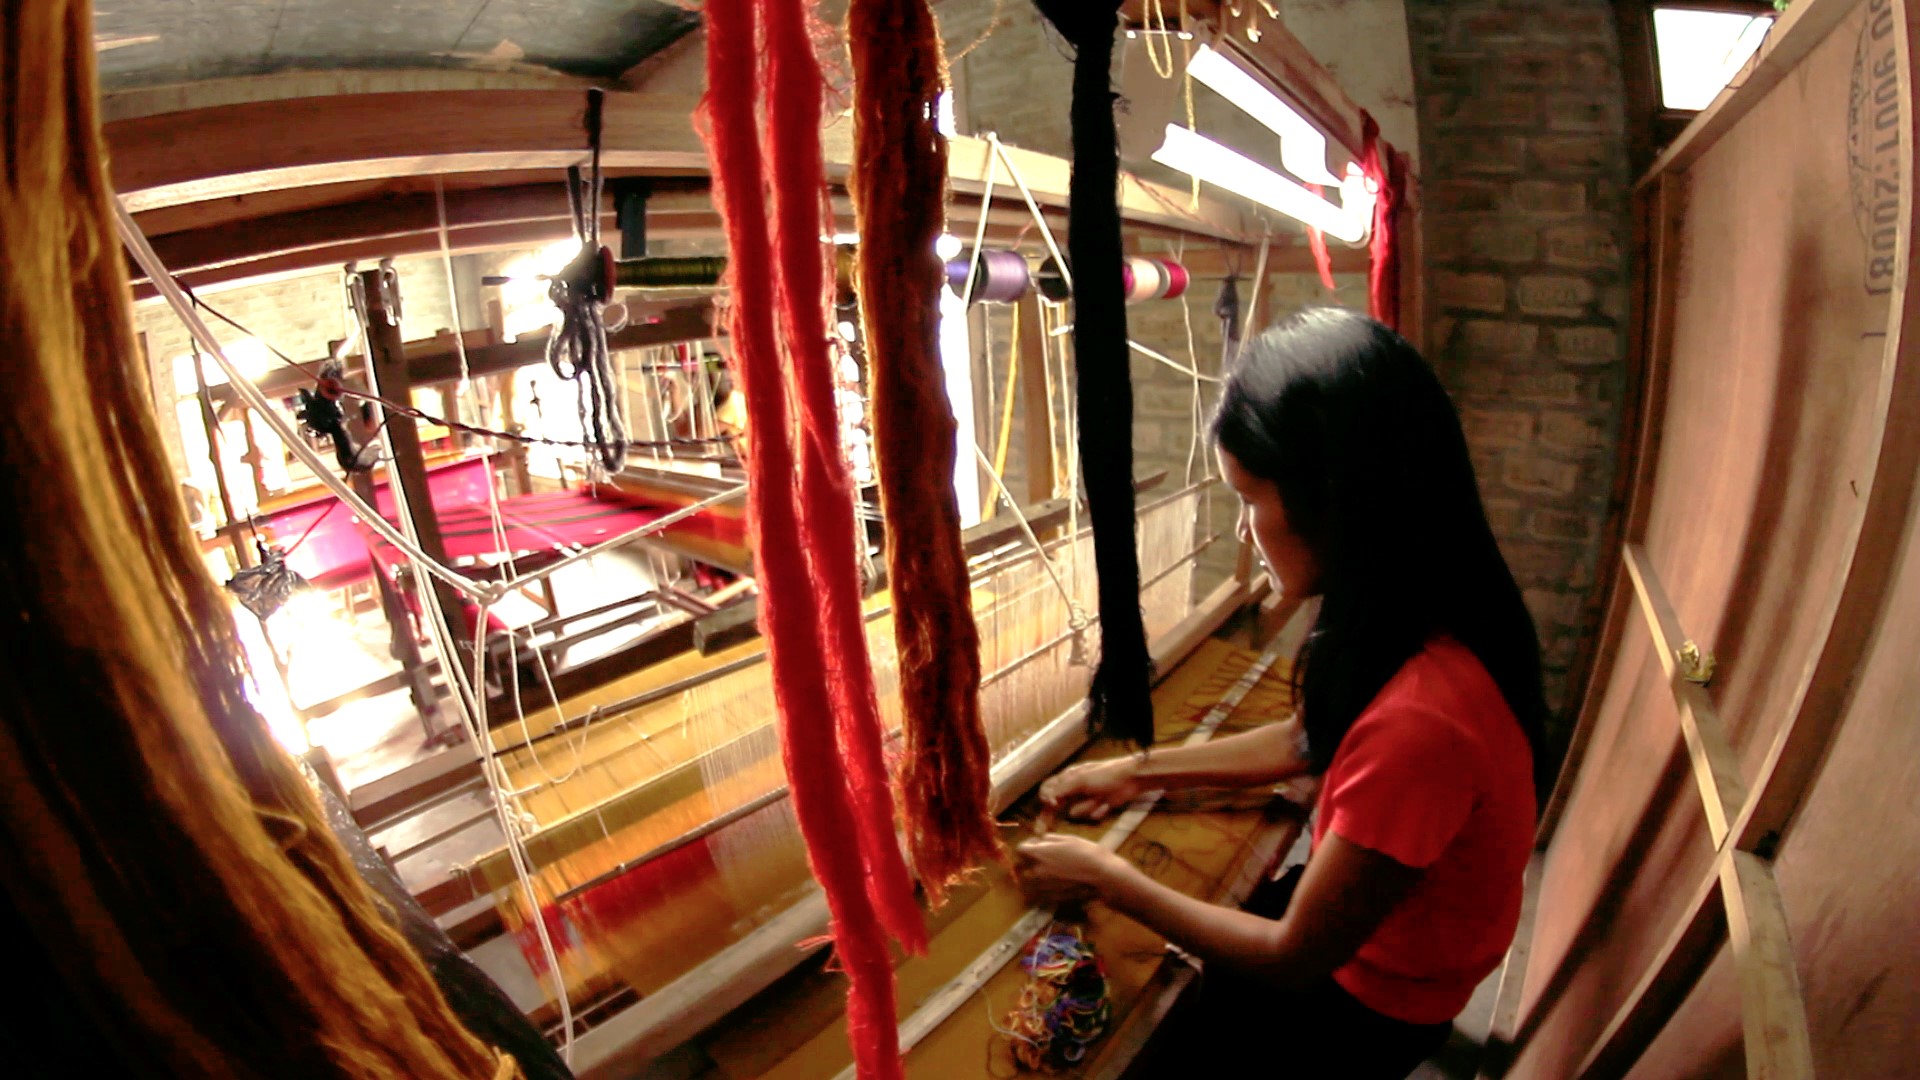 Weaving, if given a fair chance can be a very good medium of livelihood.